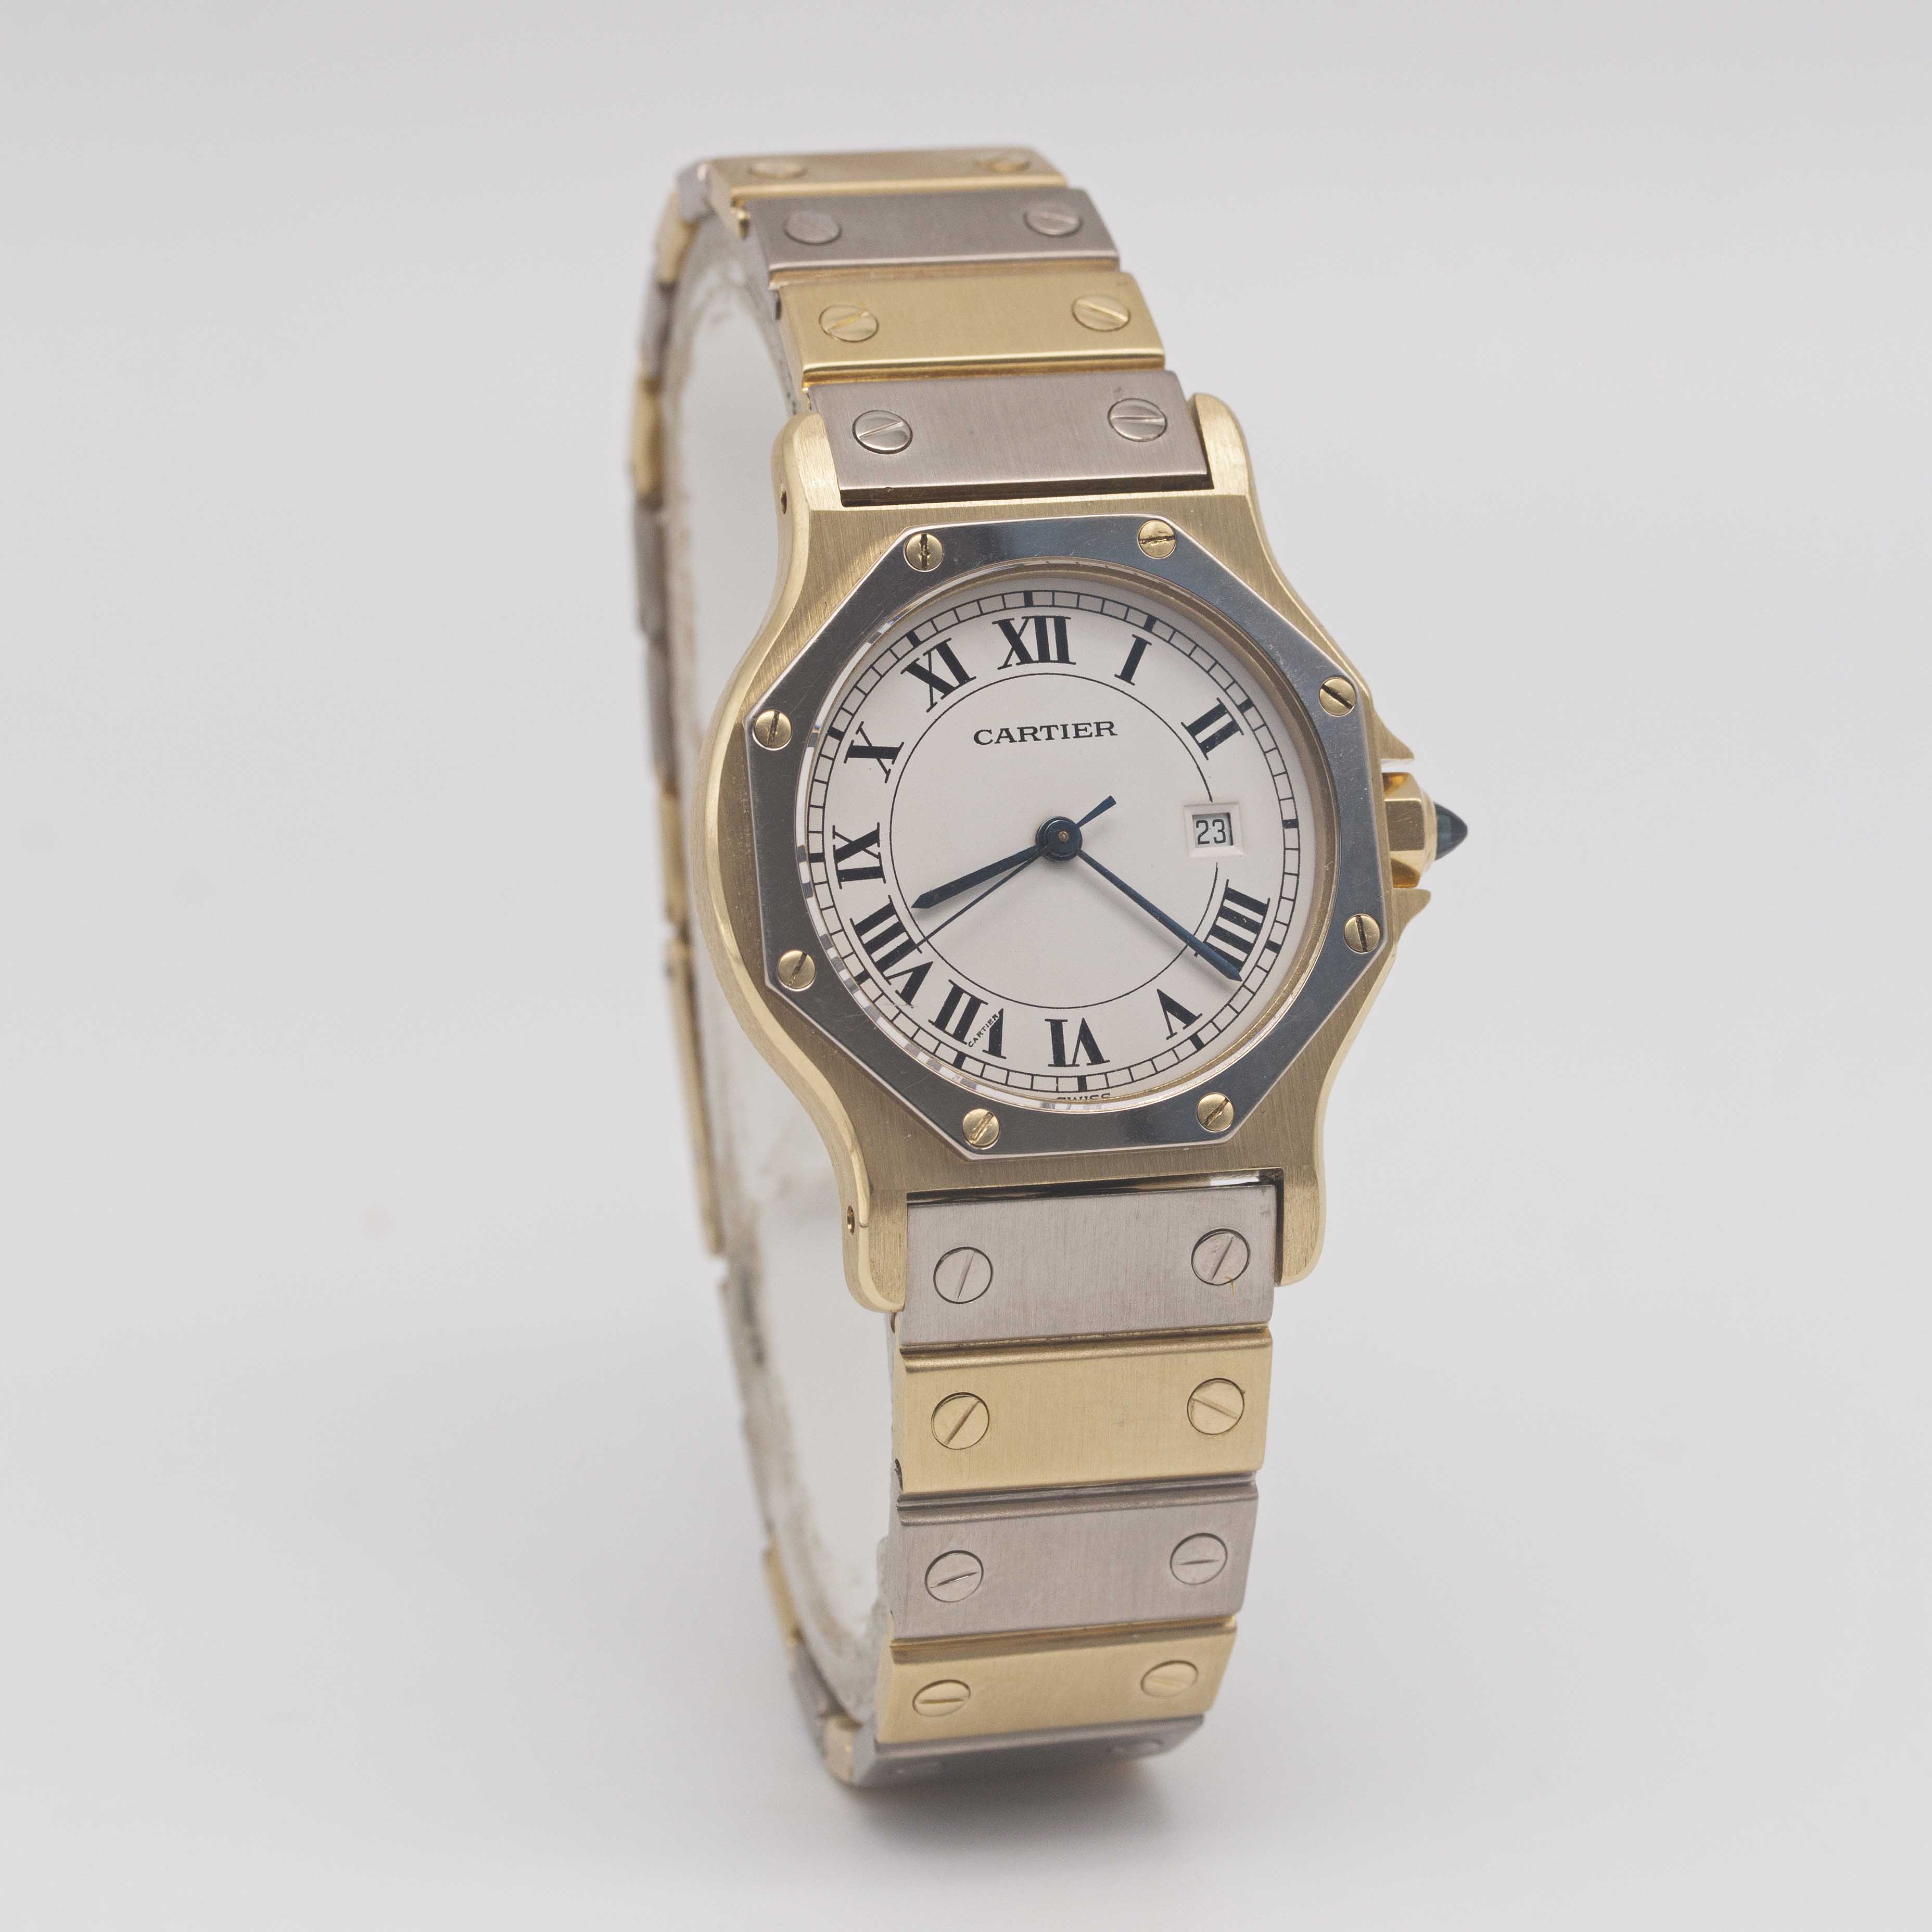 A RARE GENTLEMAN'S SIZE 18K SOLID WHITE & YELLOW GOLD CARTIER SANTOS OCTAGONAL AUTOMATIC BRACELET - Image 5 of 10